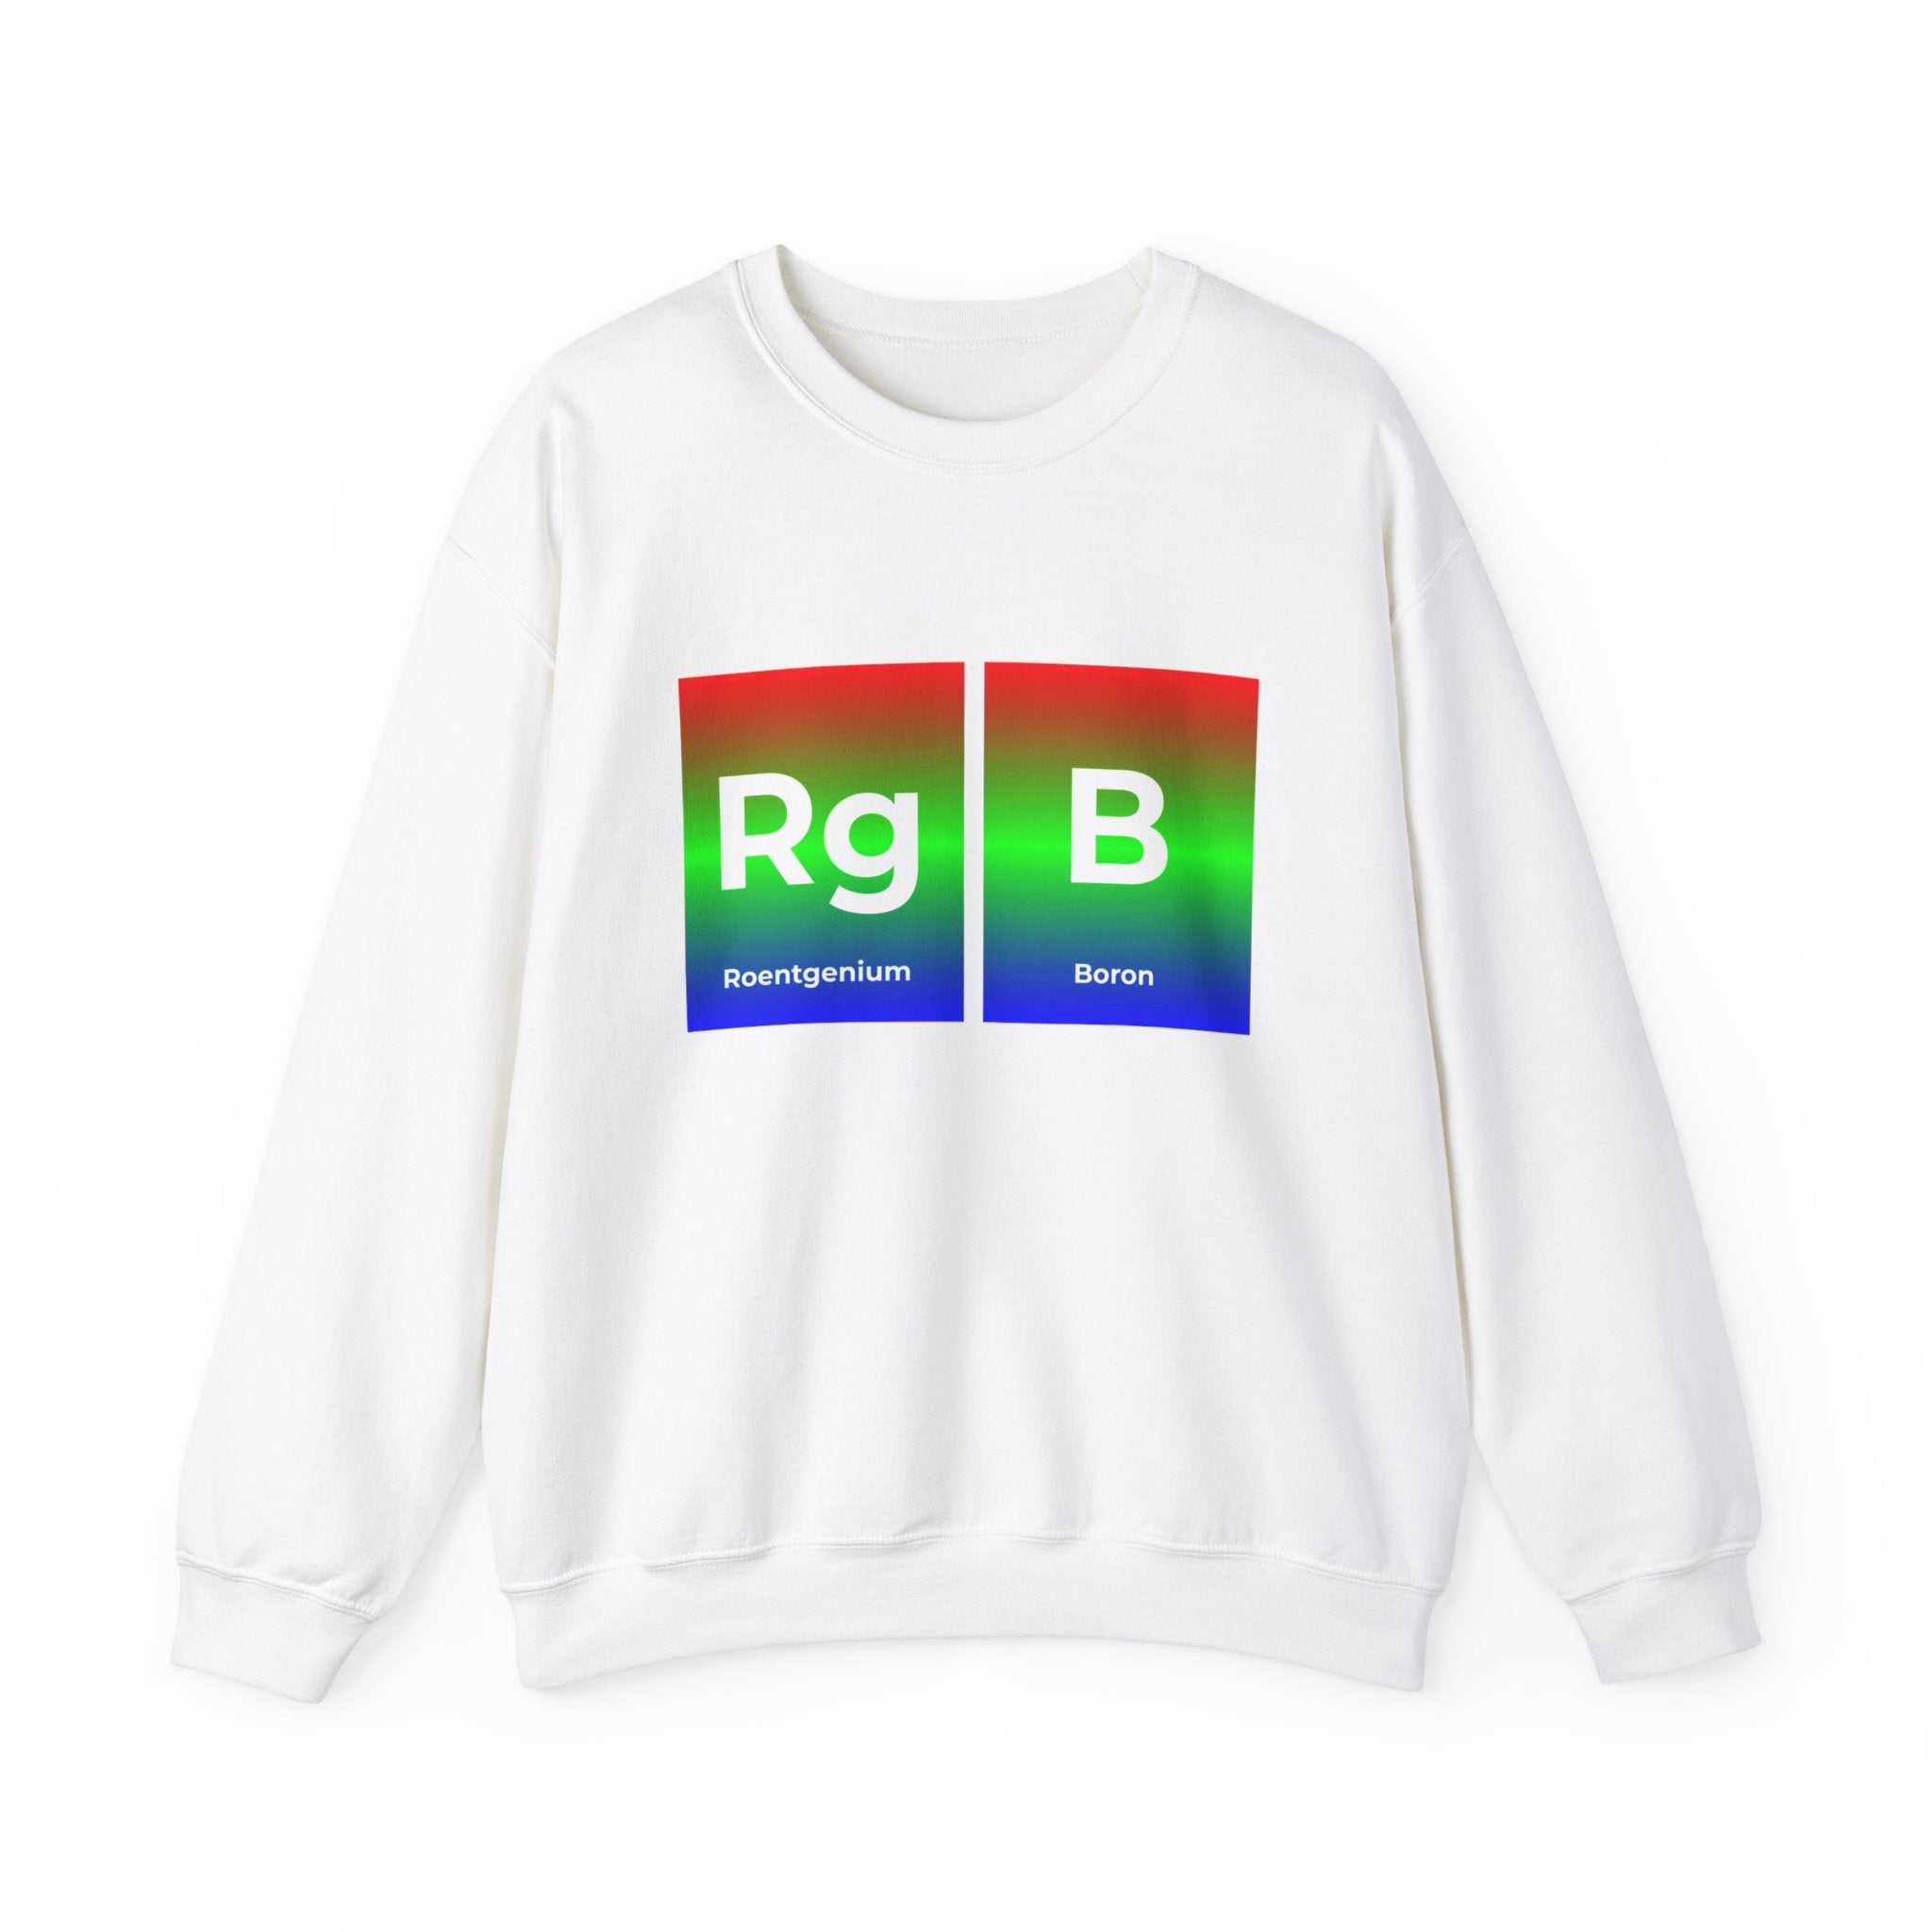 This stylish RG-B - Sweatshirt features a graphic of two color-coded periodic table elements, Roentgenium (Rg) and Boron (B), each displayed in a red, green, and blue gradient background. Perfect for comfort lovers, this cozy piece seamlessly combines fashion and science.